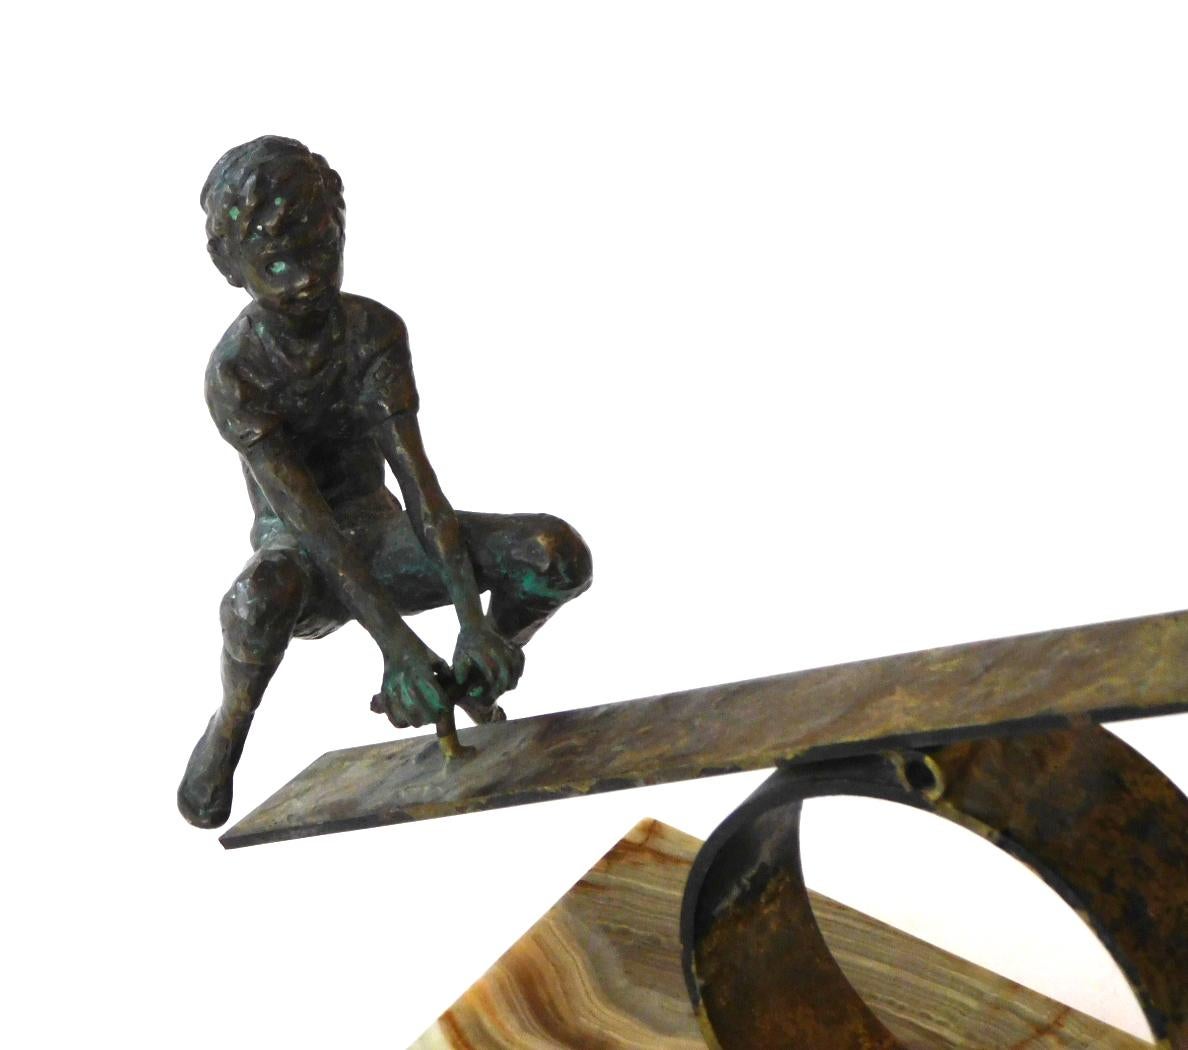 North American Playful Signed Bronze Seesaw Sculpture by Curtis Jere, 1968 For Sale